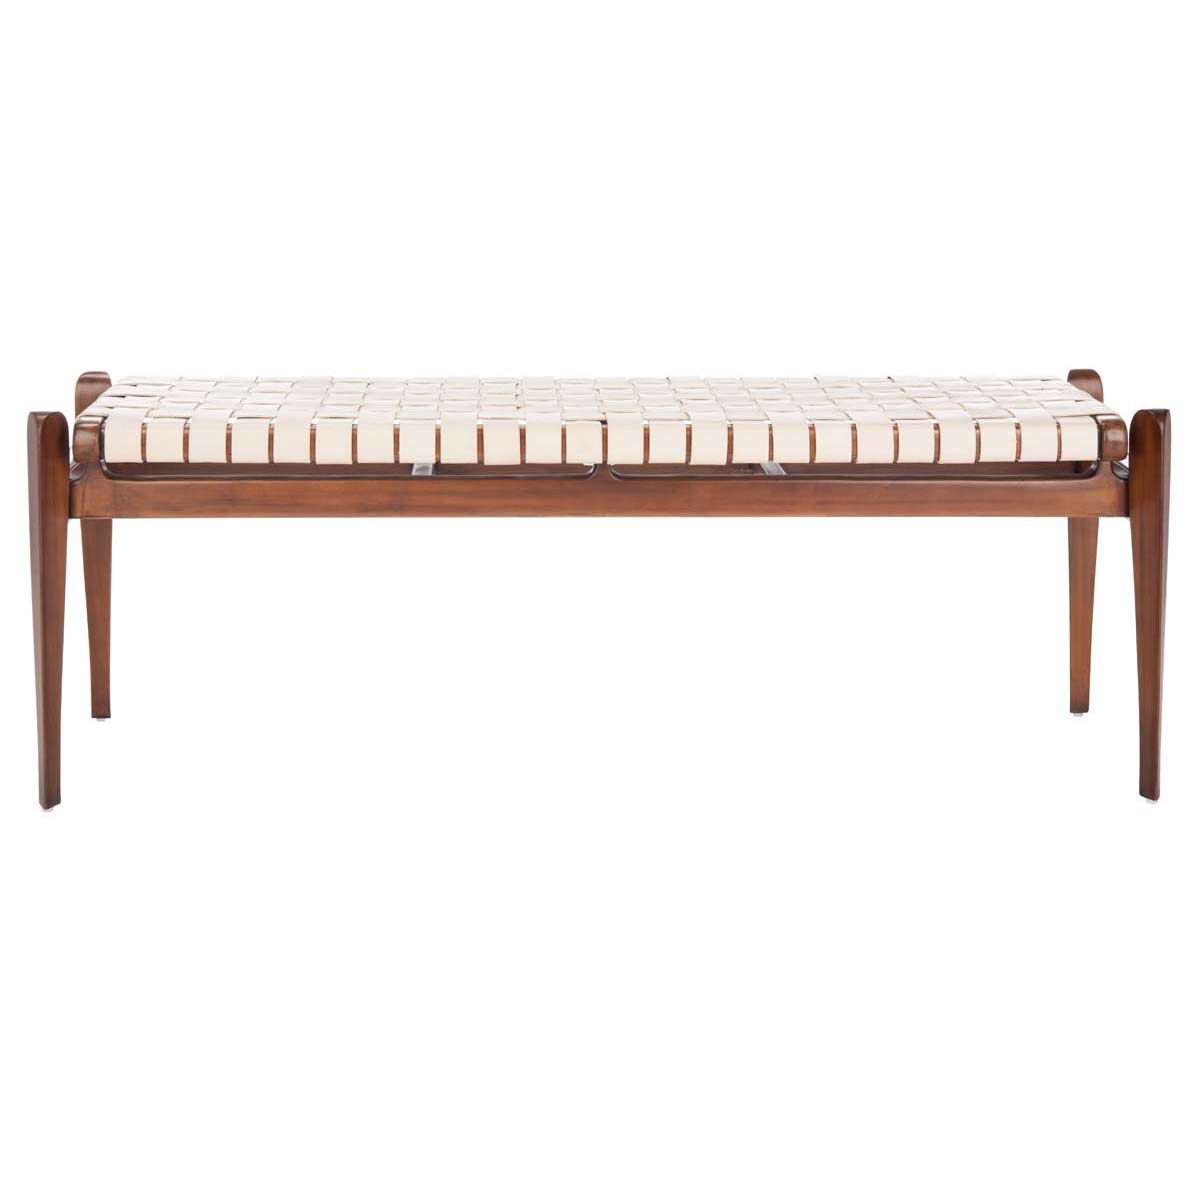 Safavieh Couture Dilan Leather Bench - White / Light Brown